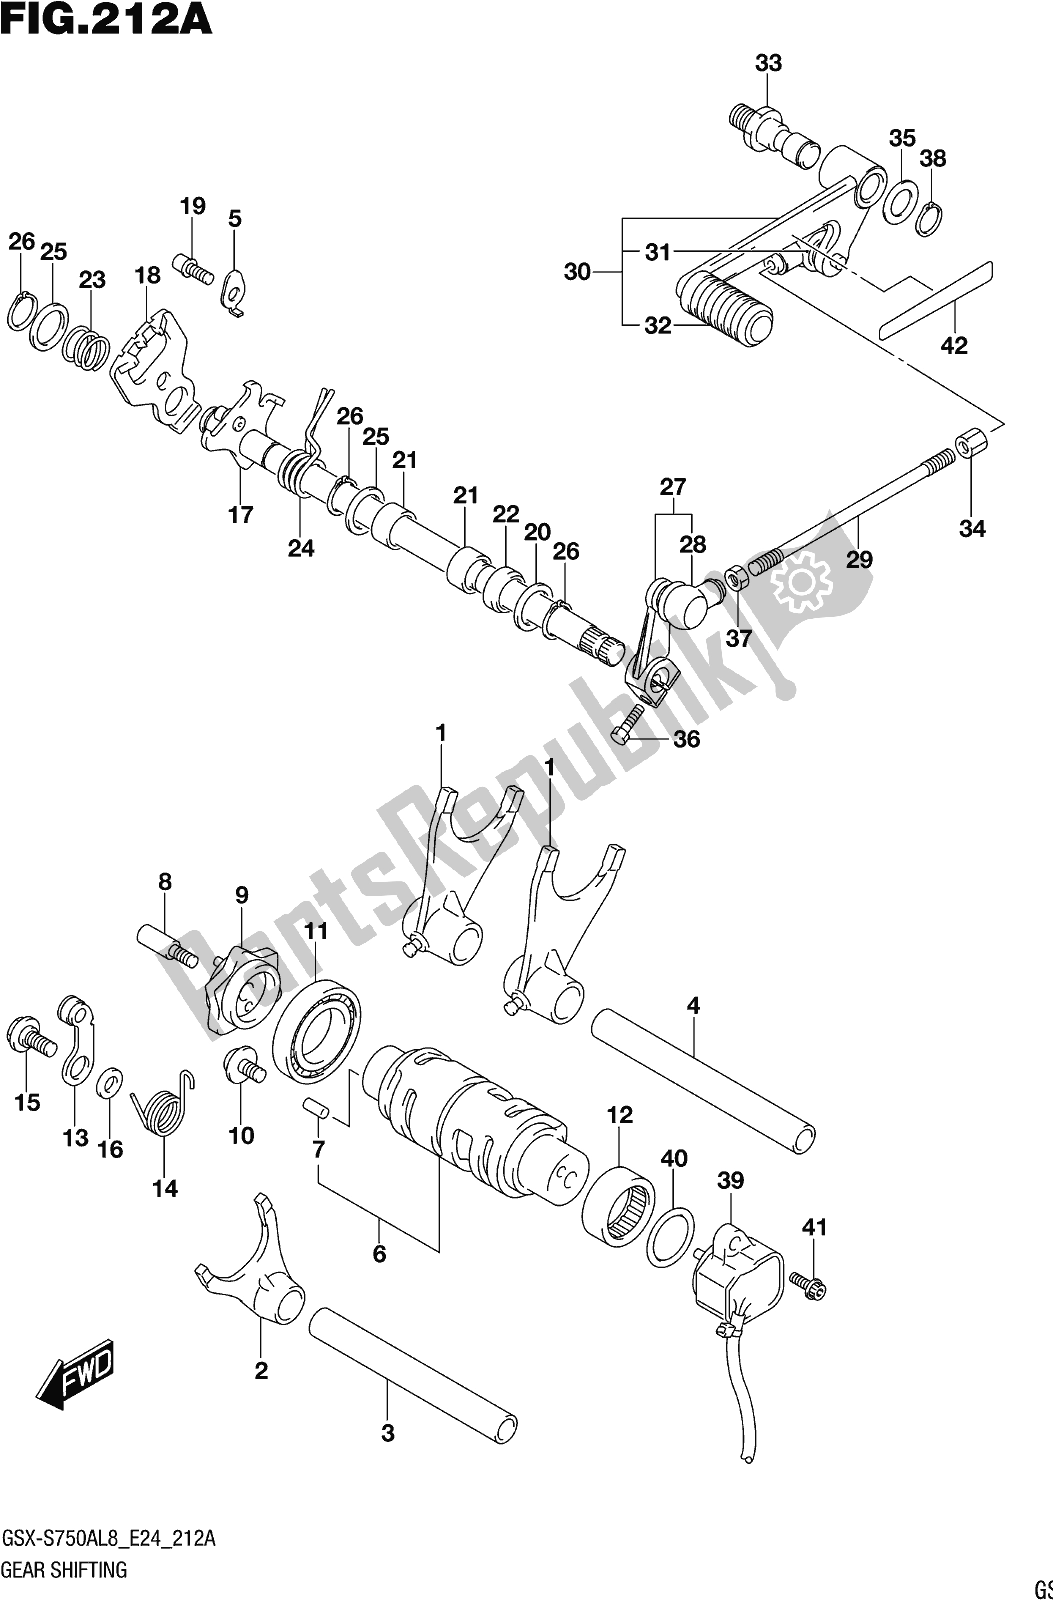 All parts for the Fig. 212a Gear Shifting of the Suzuki Gsx-s 750 ZA 2018